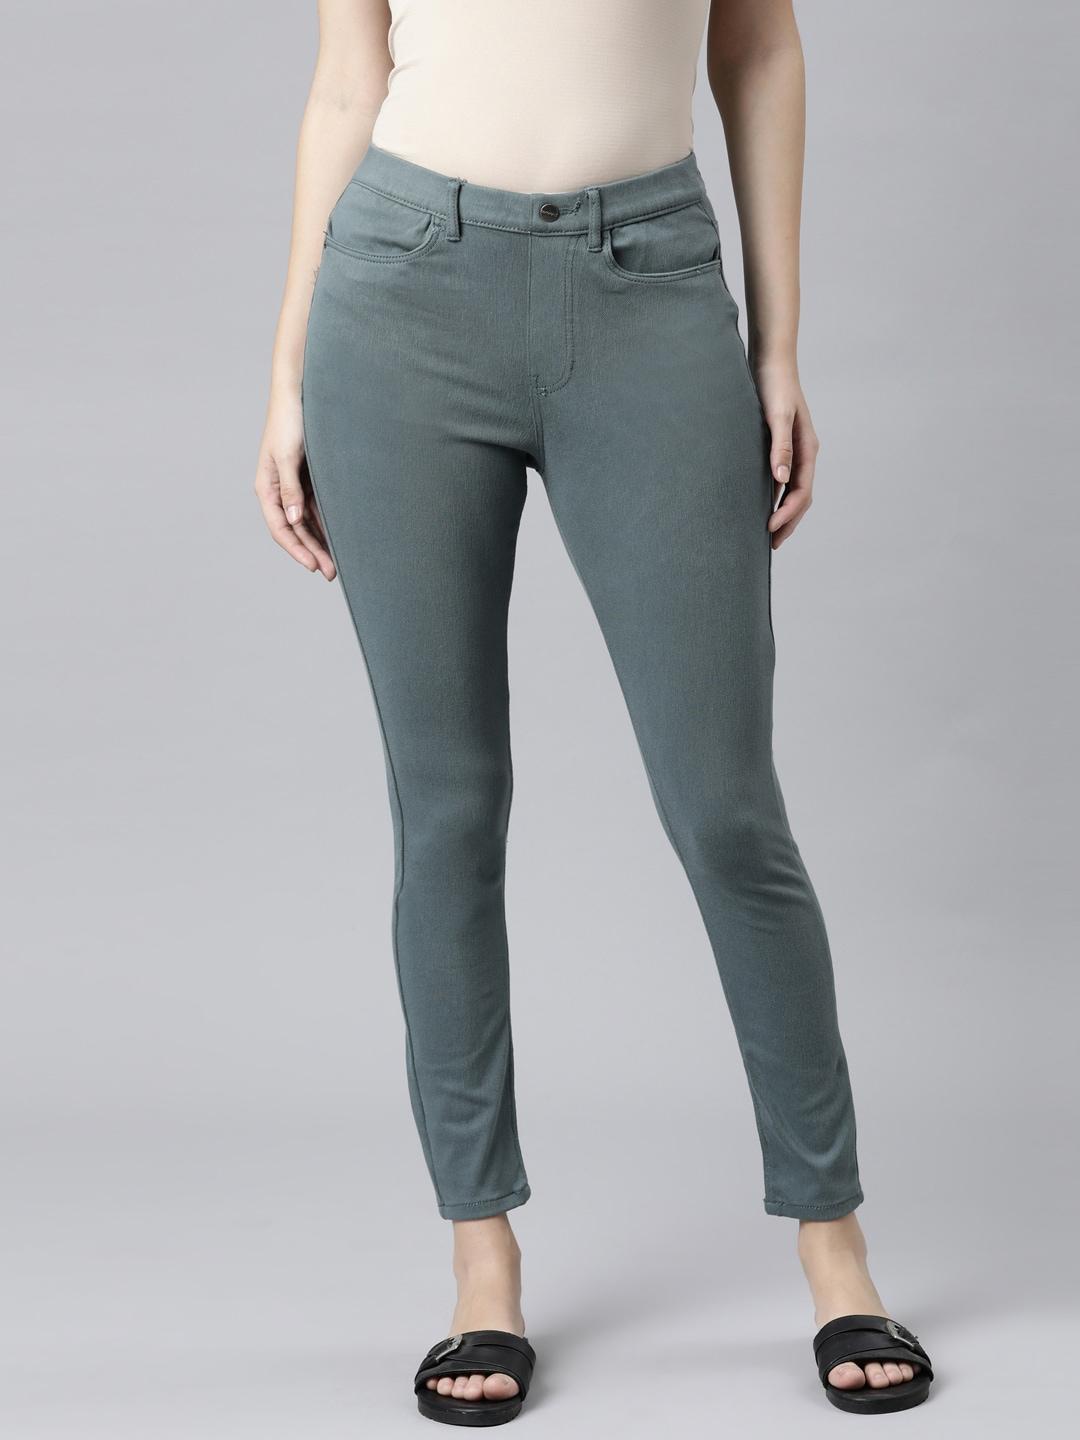 go-colors-women-green-cotton-solid-slim-fit-jeggings